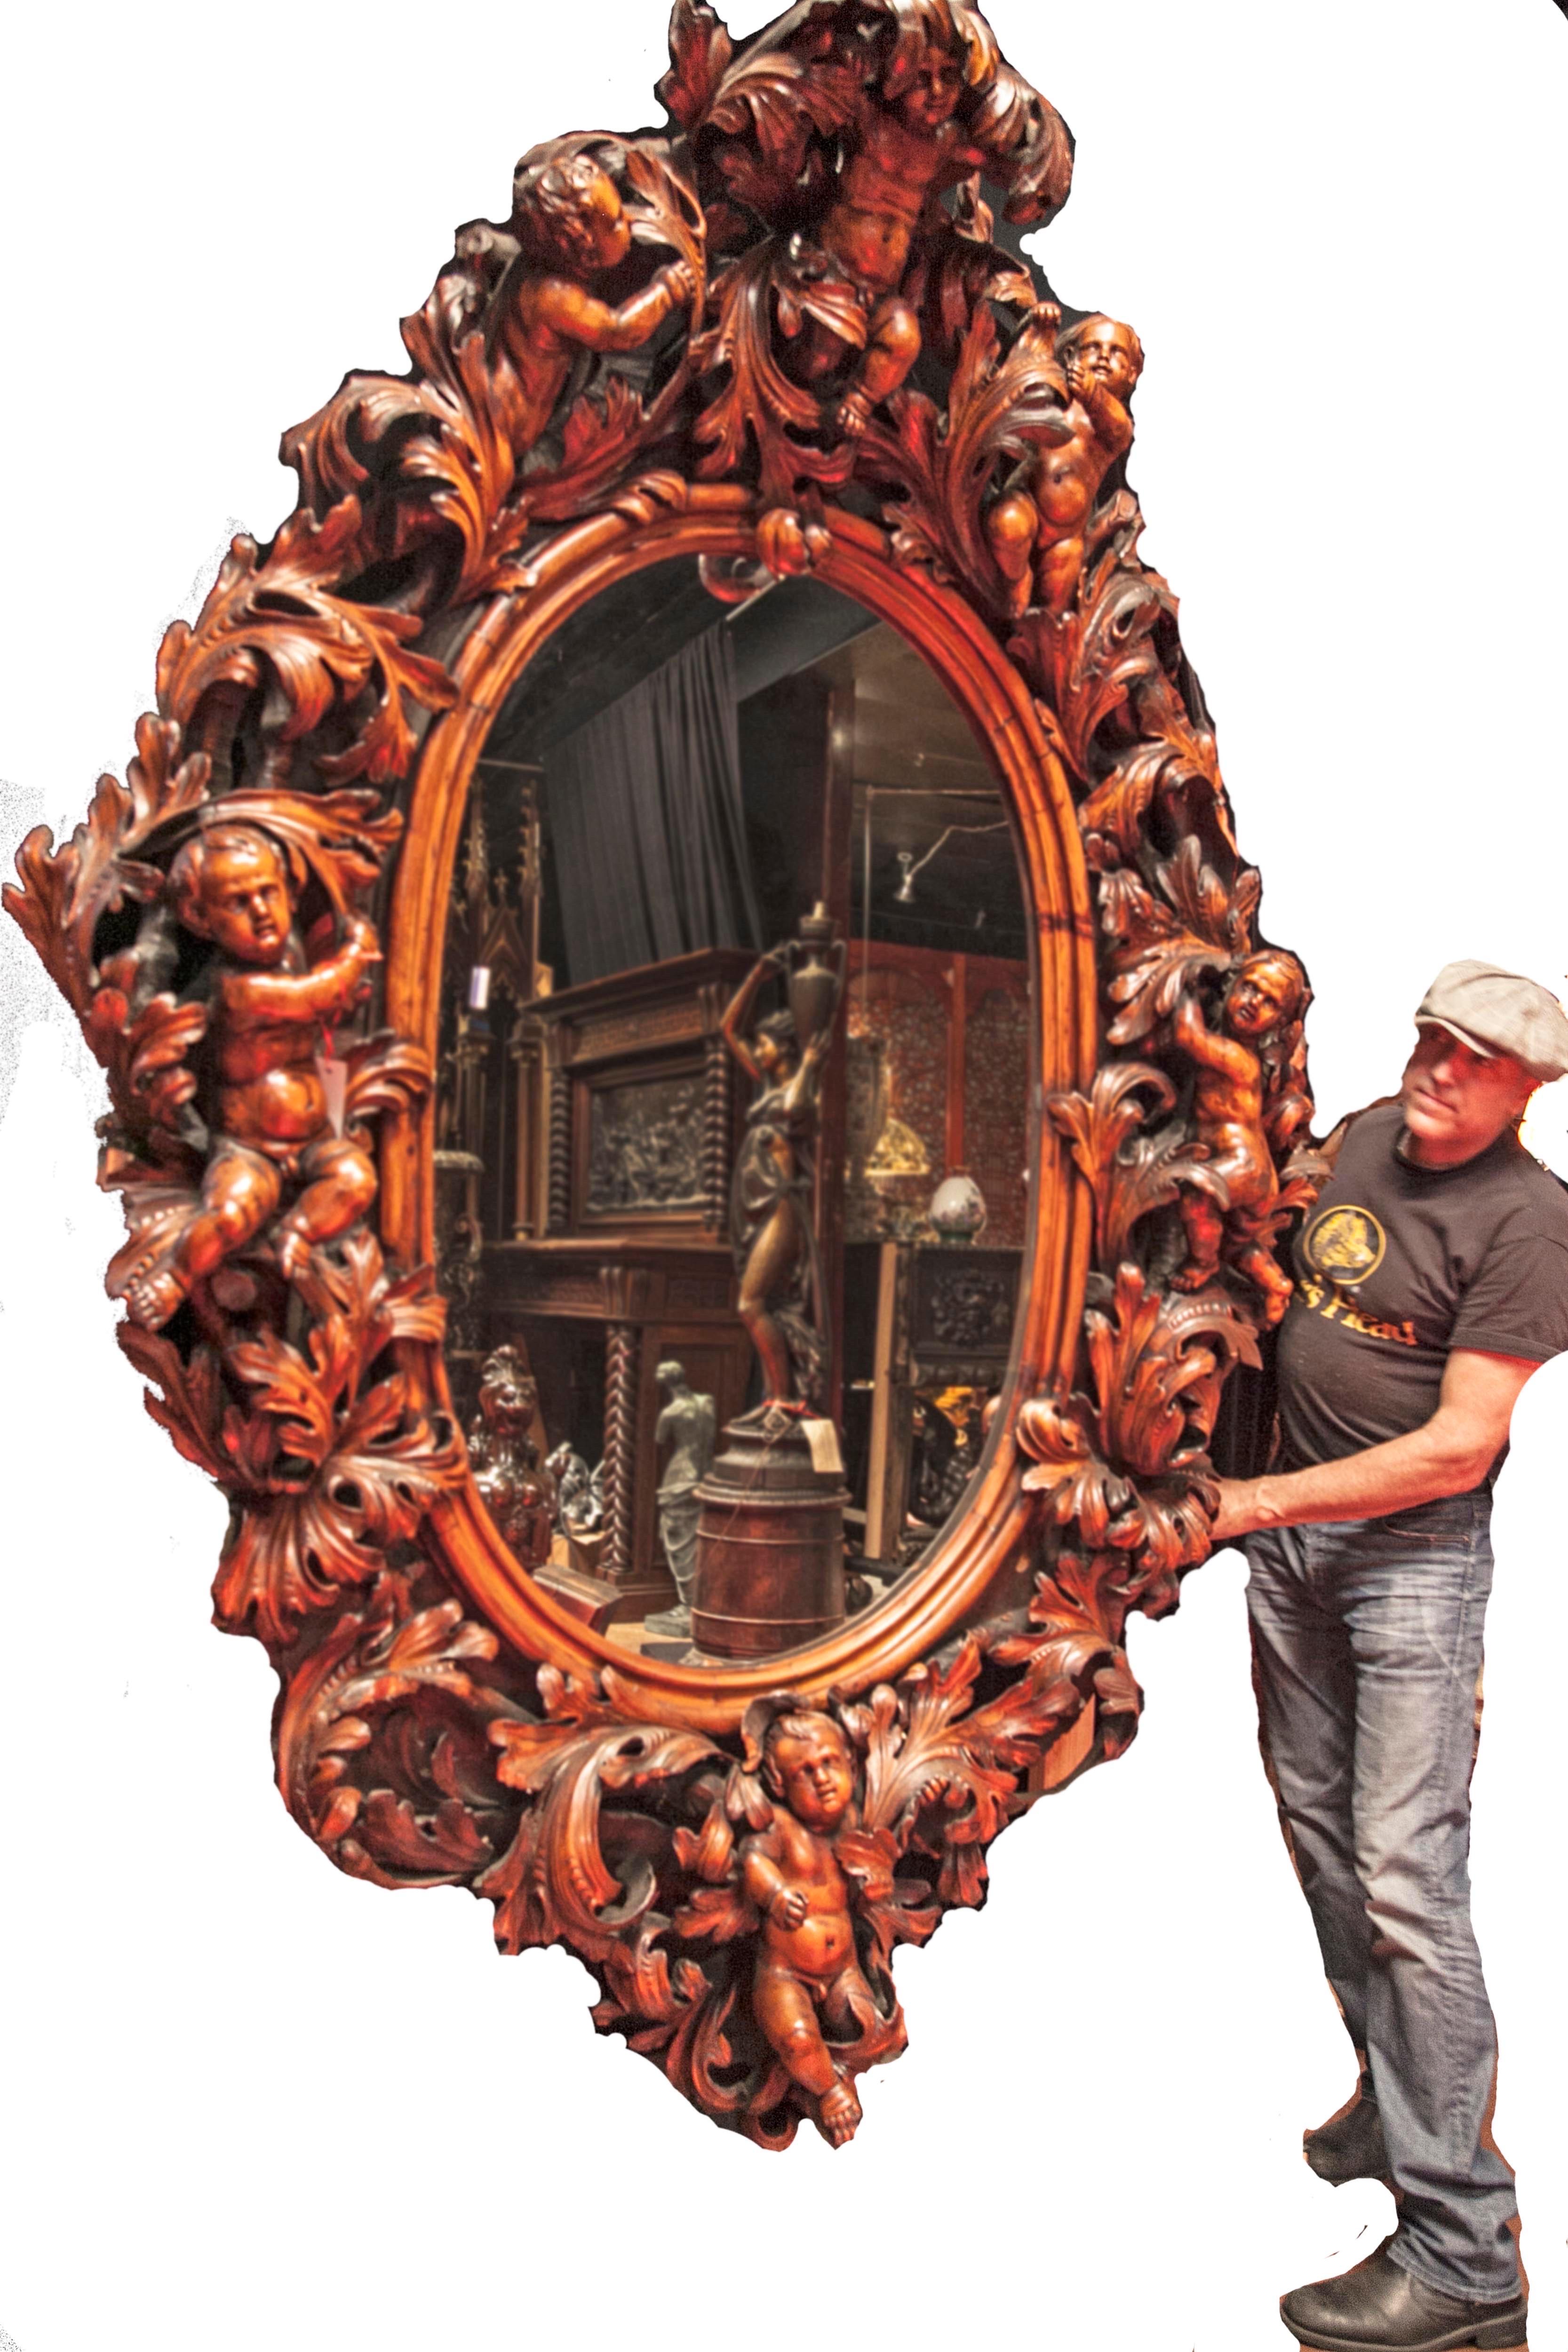 Second to none monumental palace mirror
Most likely the best of this kind in the world by a famous maker, Valentino Besarel
We were the high bidder on this magnificent mirror many years ago with auction, premium and shipping over $100,000
It is